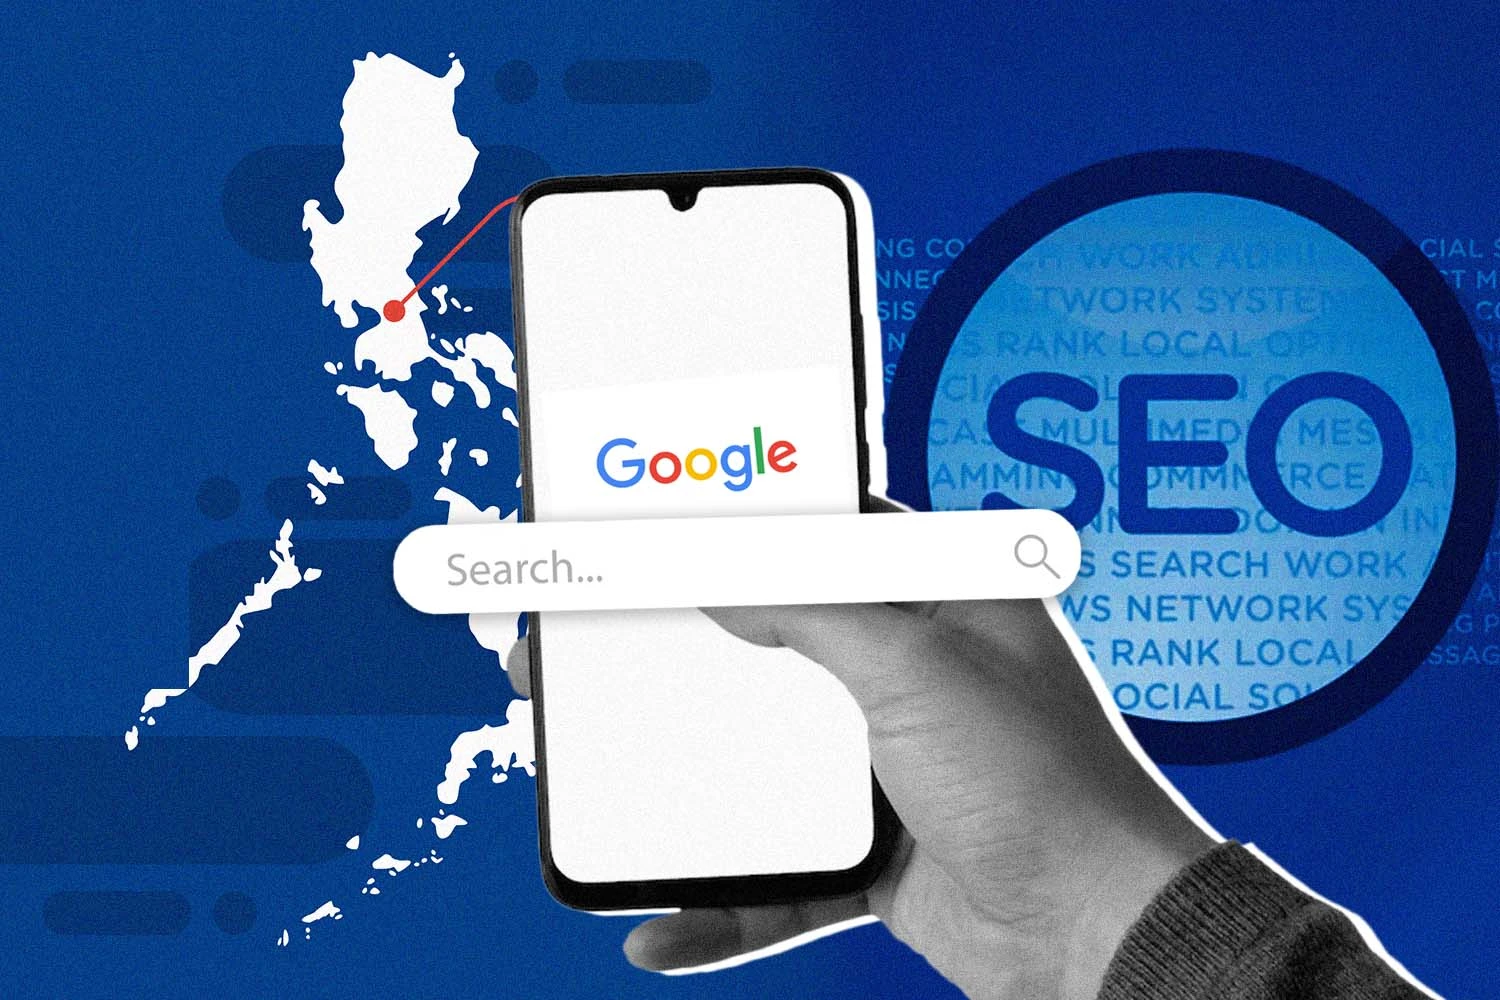 Google and the Philippine archipelago to show the SEO landscape in the Philippines.